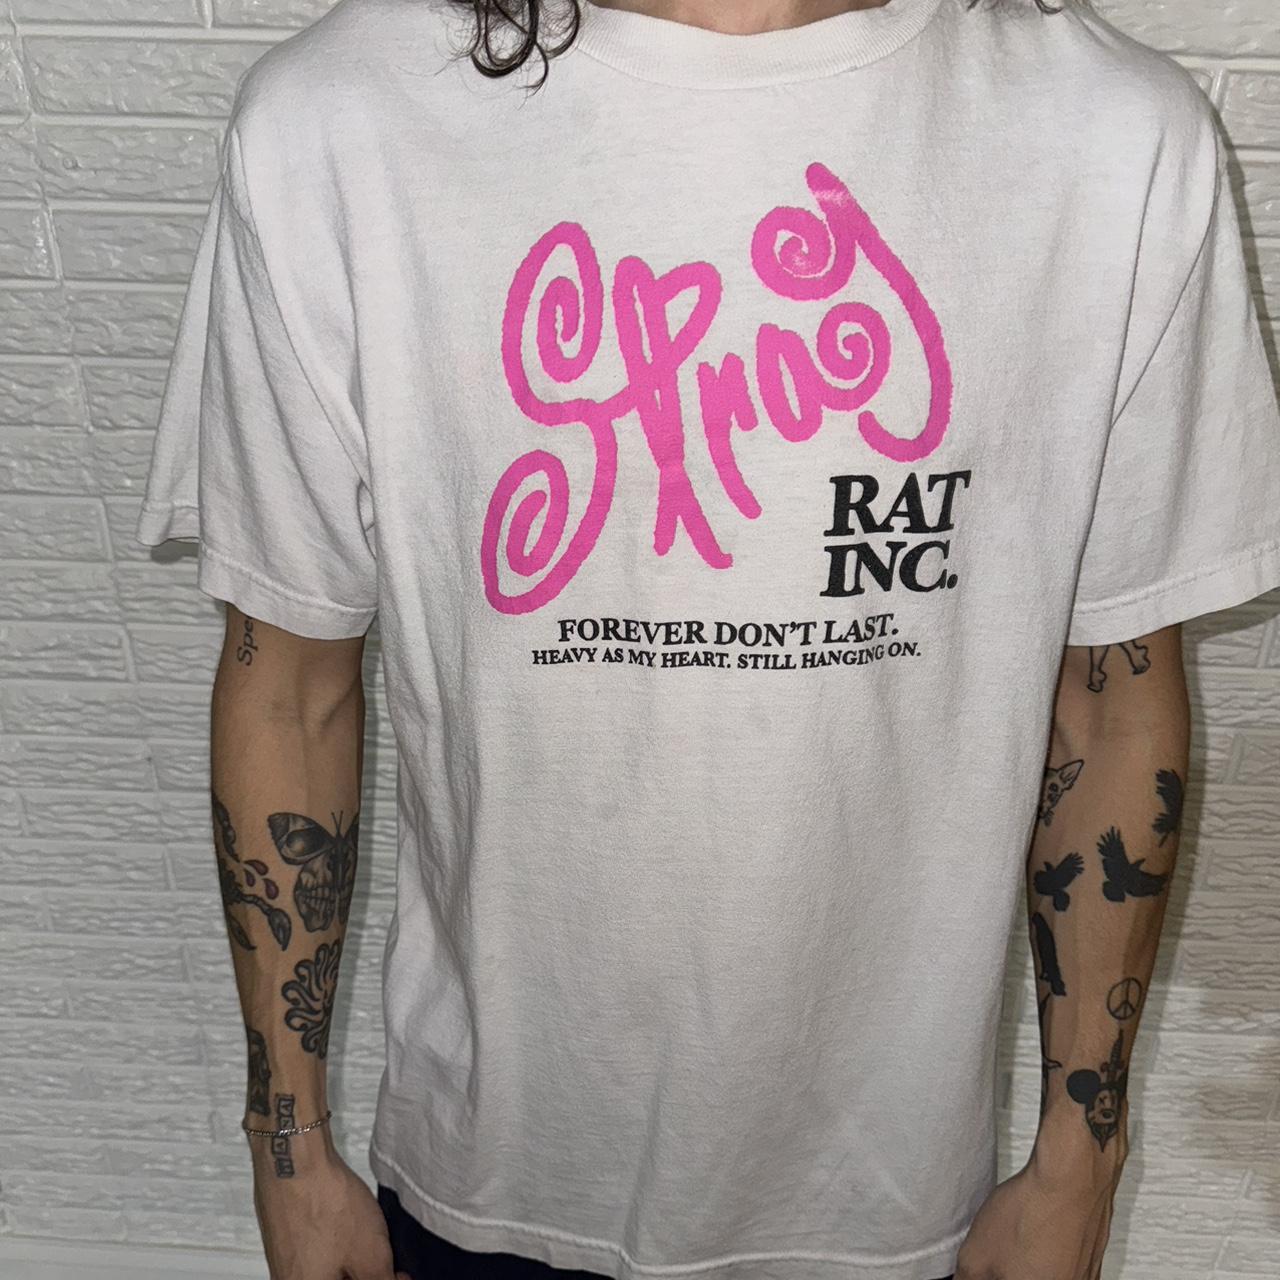 2018 or 19 Stray Rats , Forever Don’t Last Tee, Size...